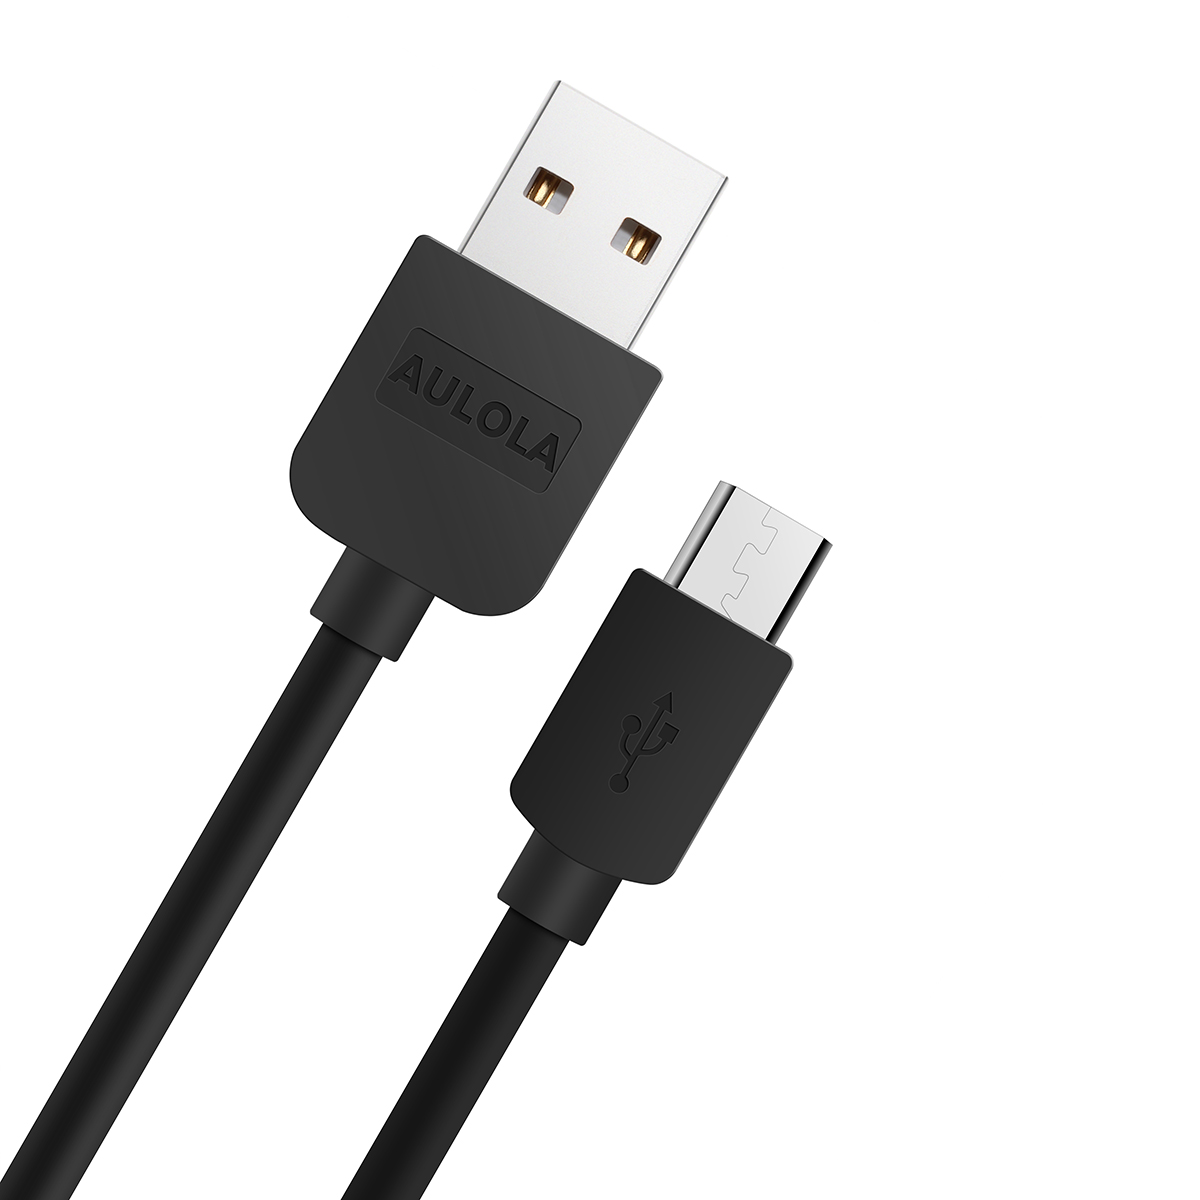 Black 1M Meter Long USB Charger Cable